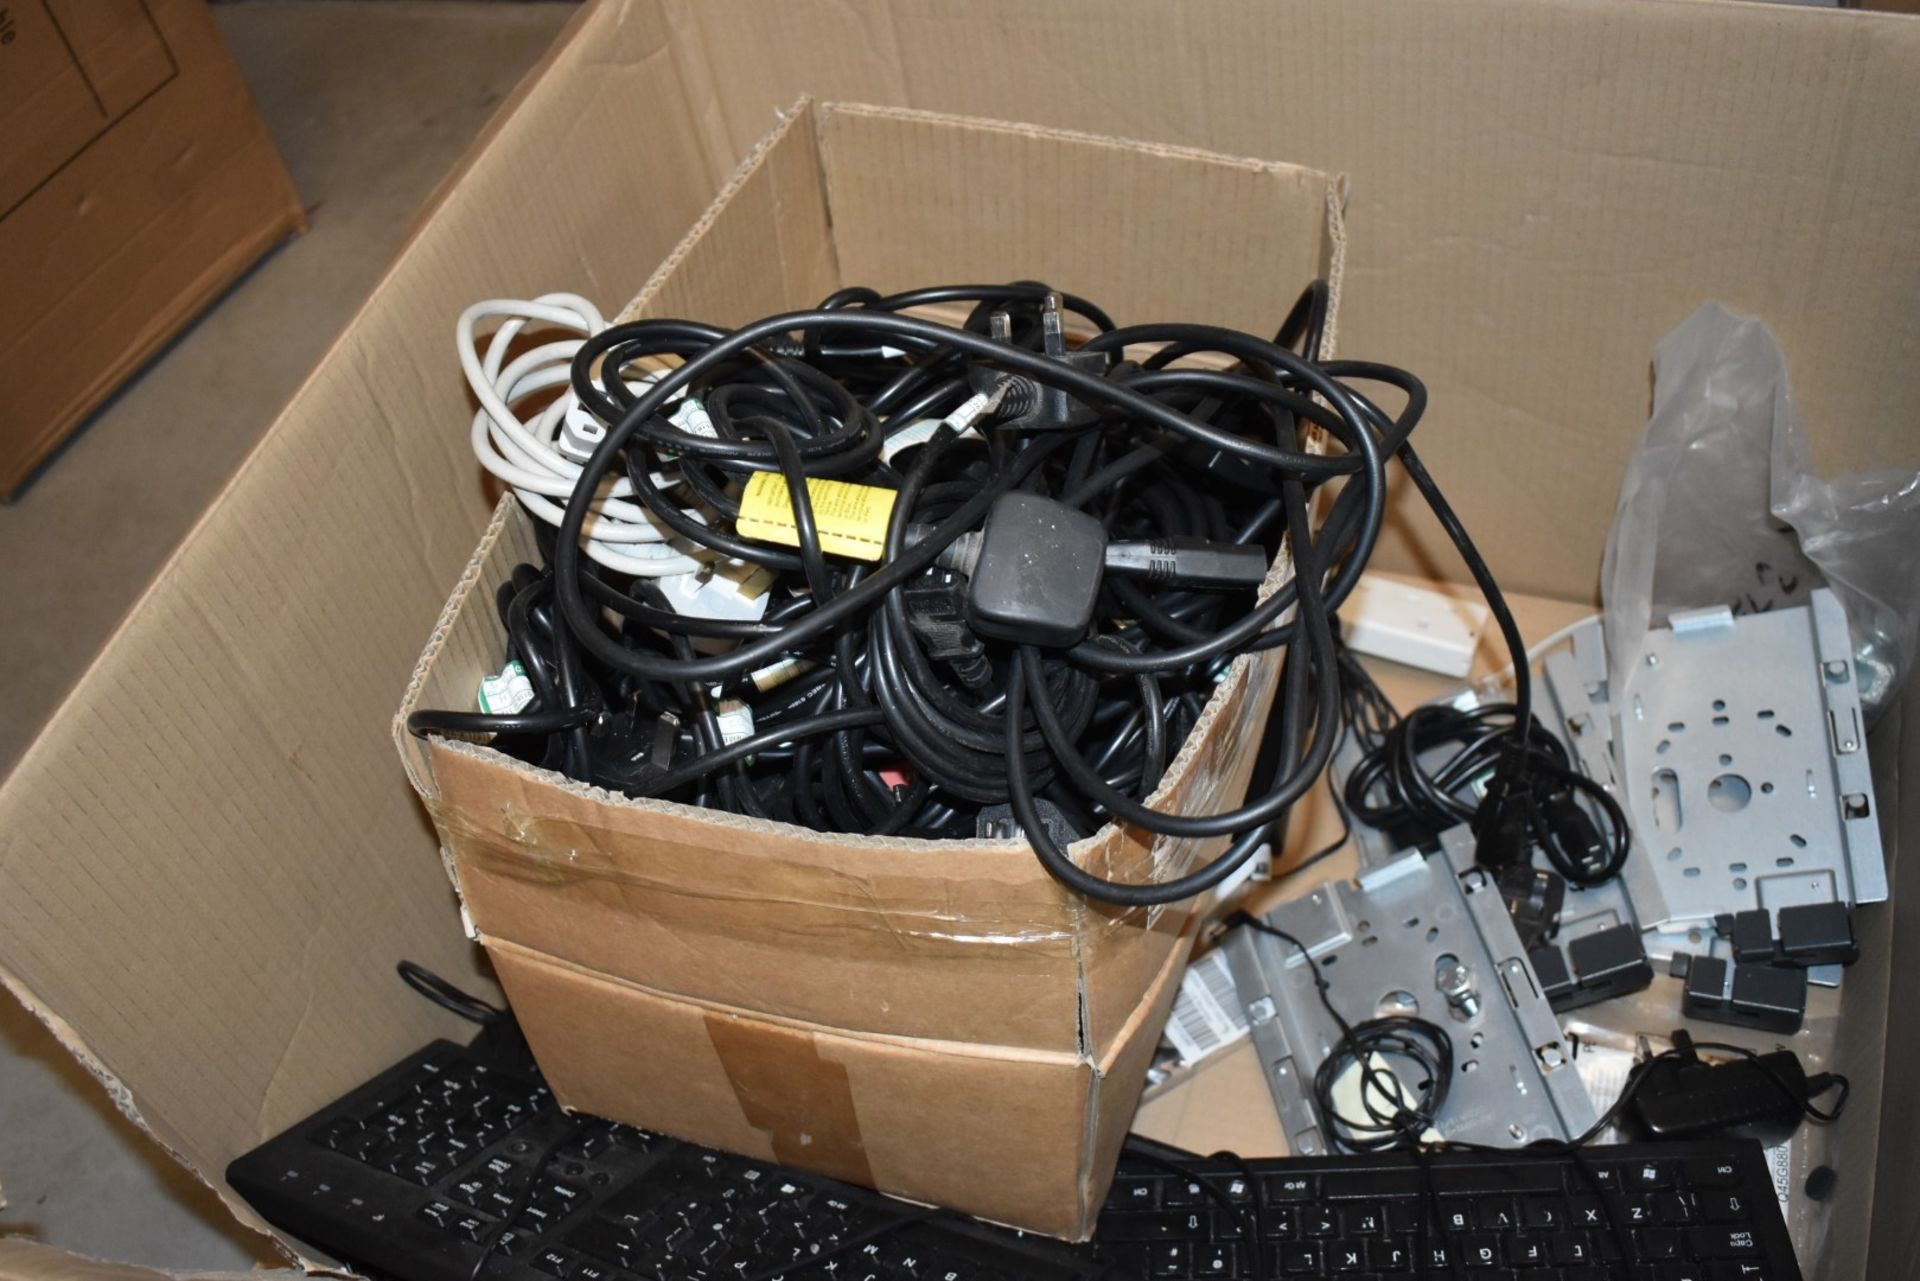 1 x Assorted Pallet Lot of Computer Equipment - Includes Laser Printer, Kettle Leads, And More! - Image 6 of 7